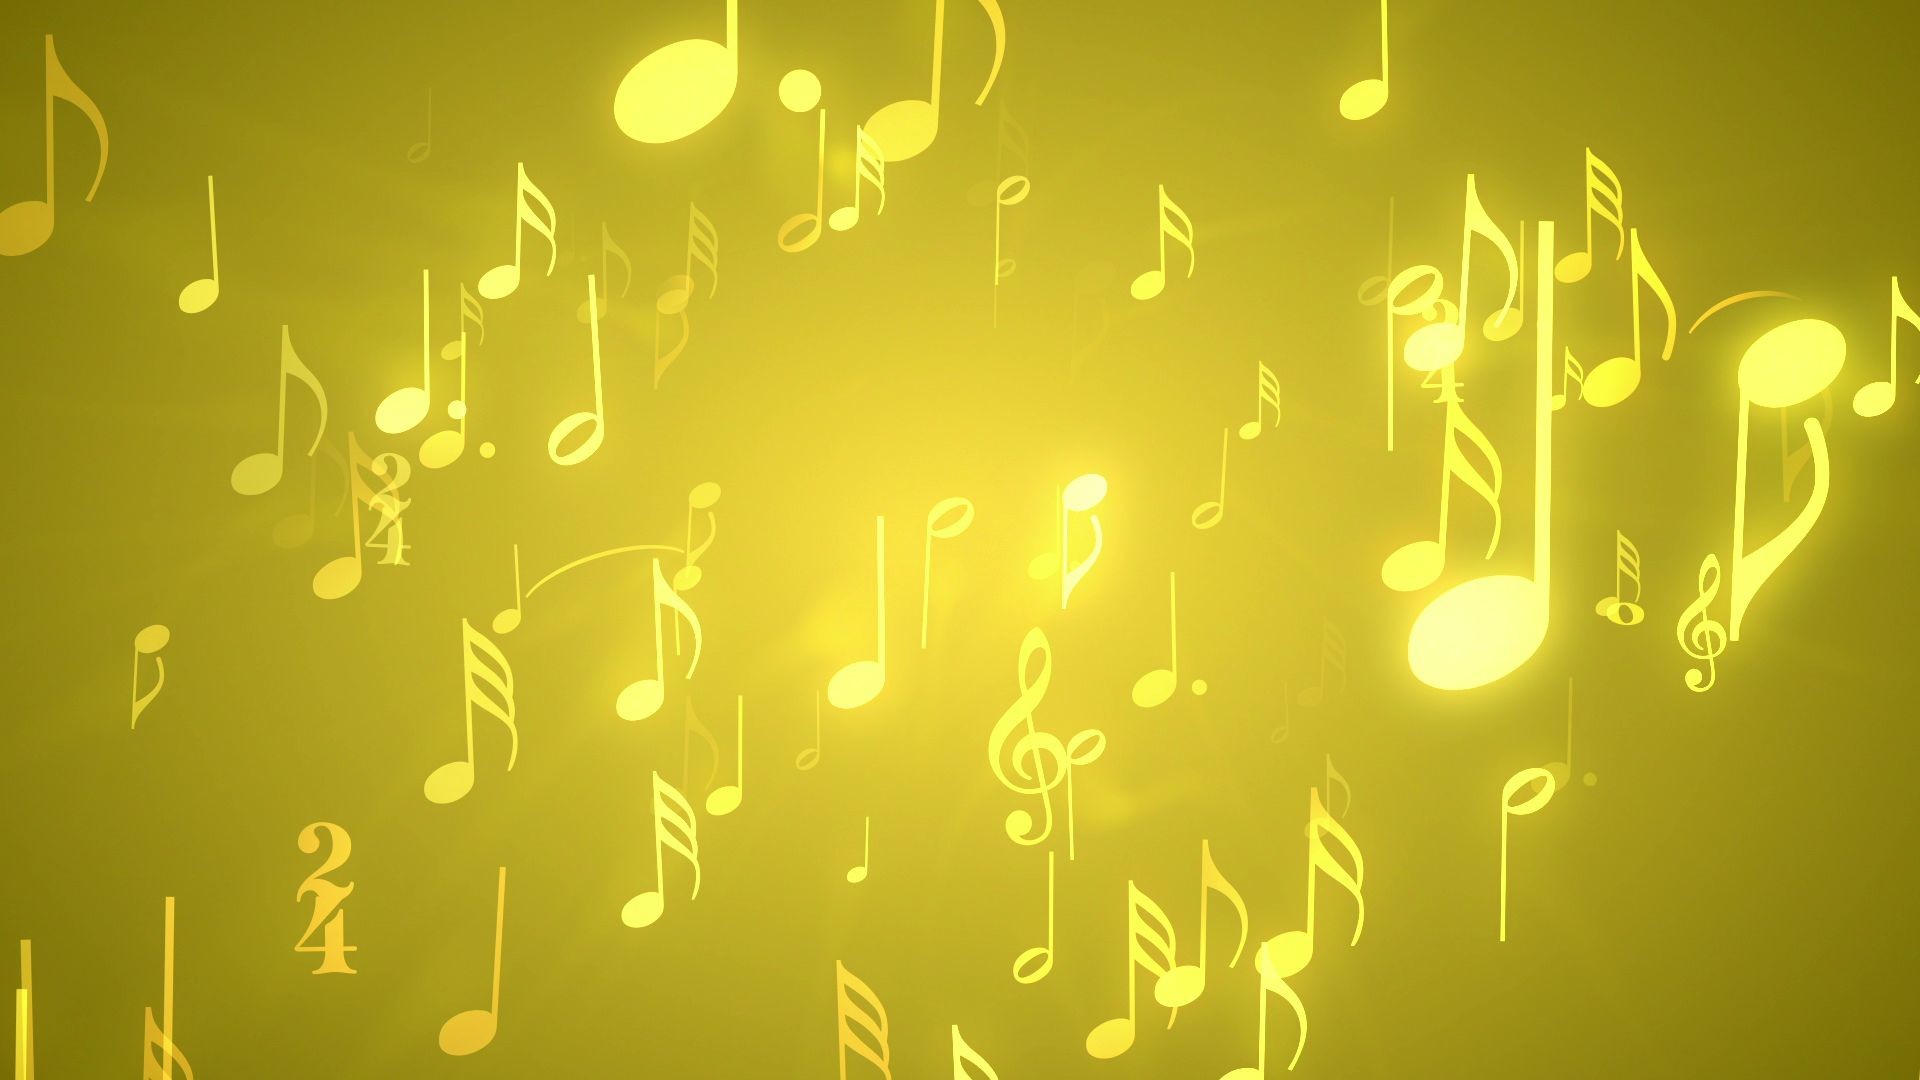 Music Notes Backgrounds (38+ pictures)